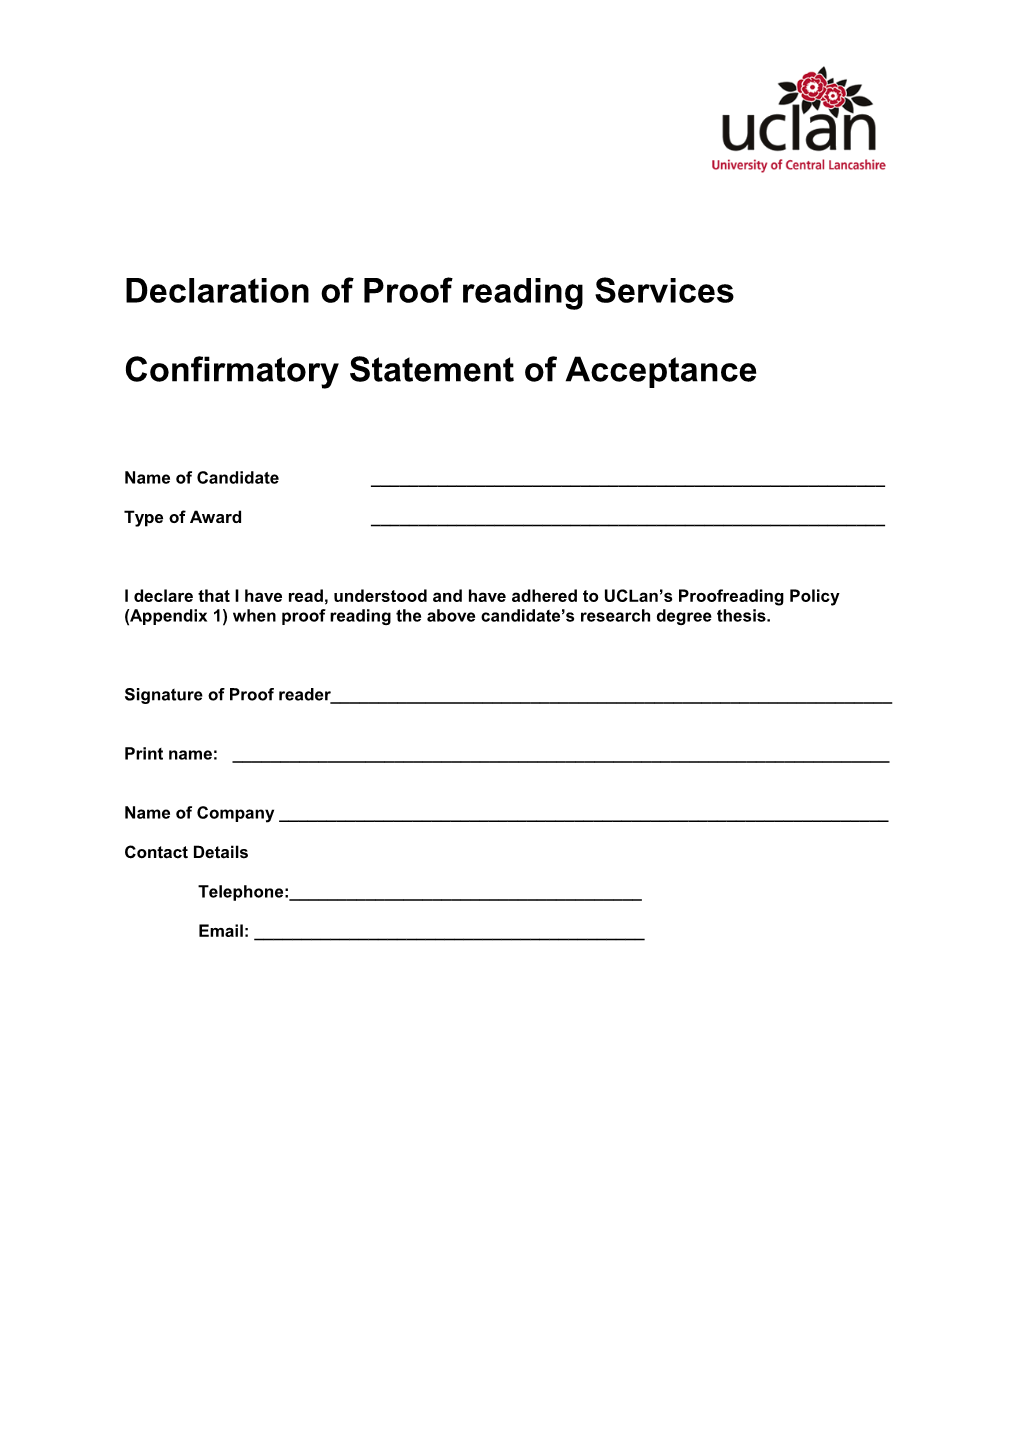 Declaration of Proofreading Services